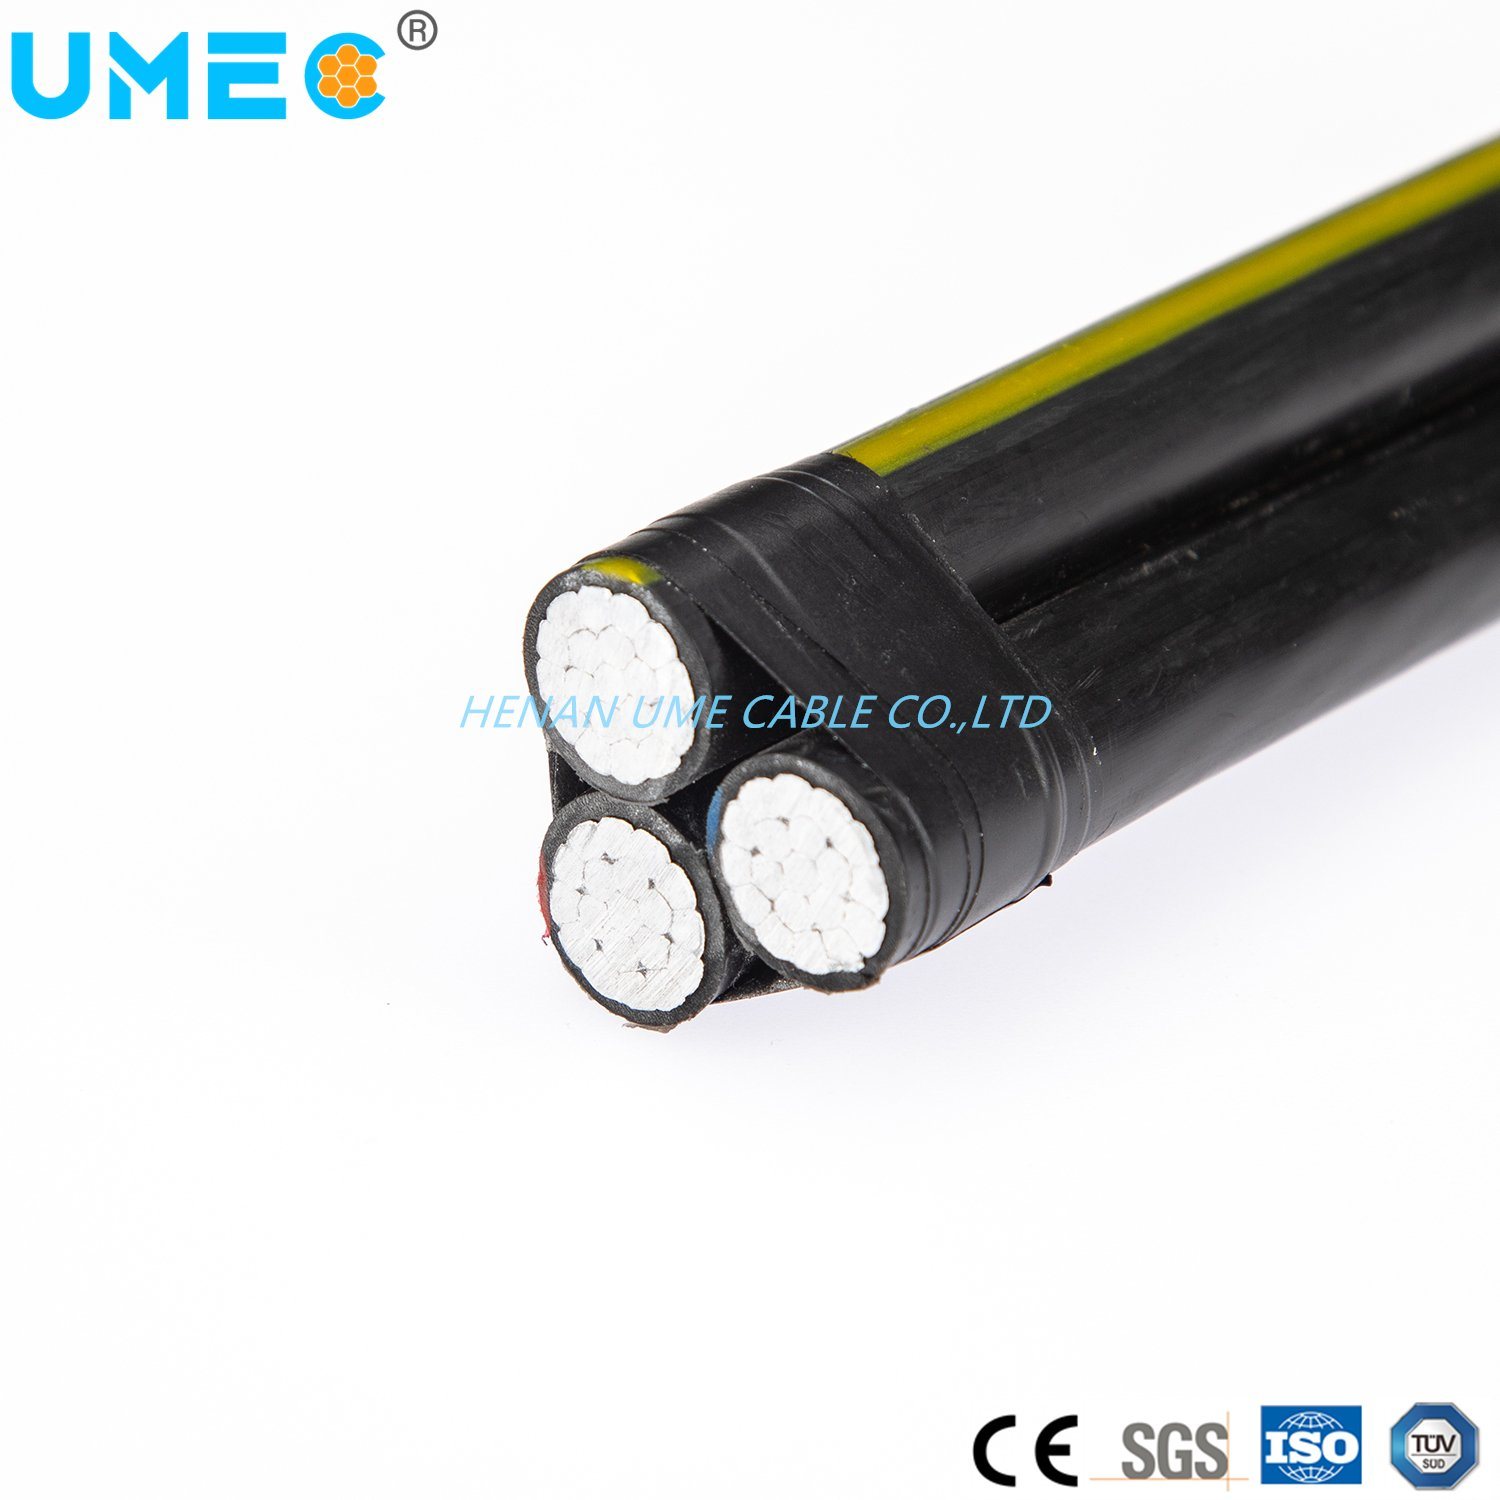 Drop Cable Aerial Bundled Cable Twisted Aluminum Conductor ABC Cable Triplex Service Drop Cable